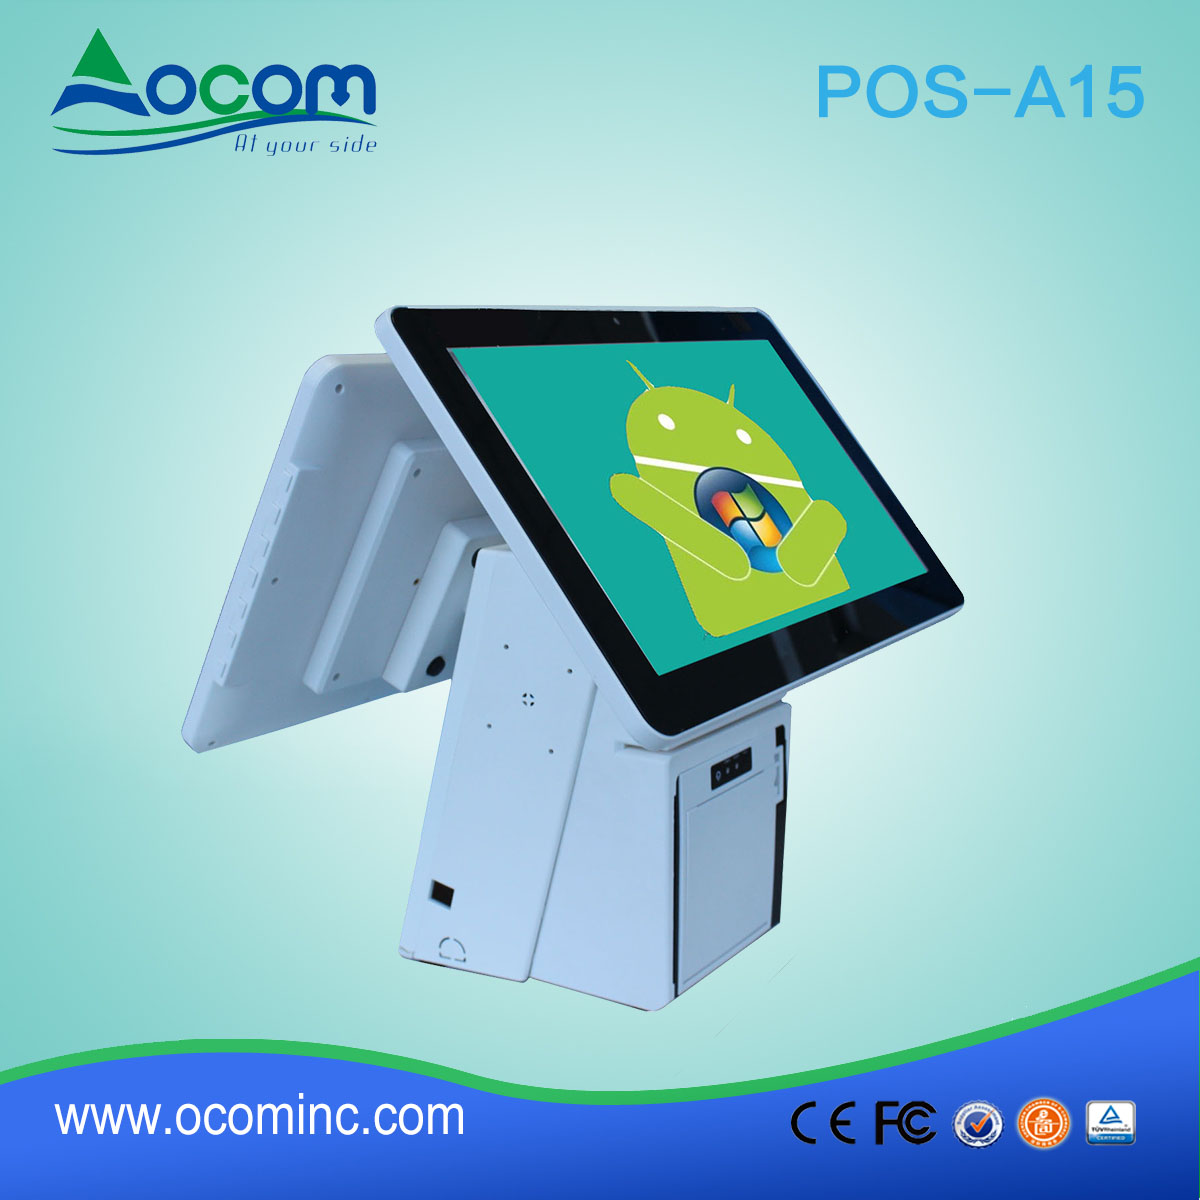 (POS-A15) 15.6 inch alle ine op Touch sreen POS Terminal met thermische printer